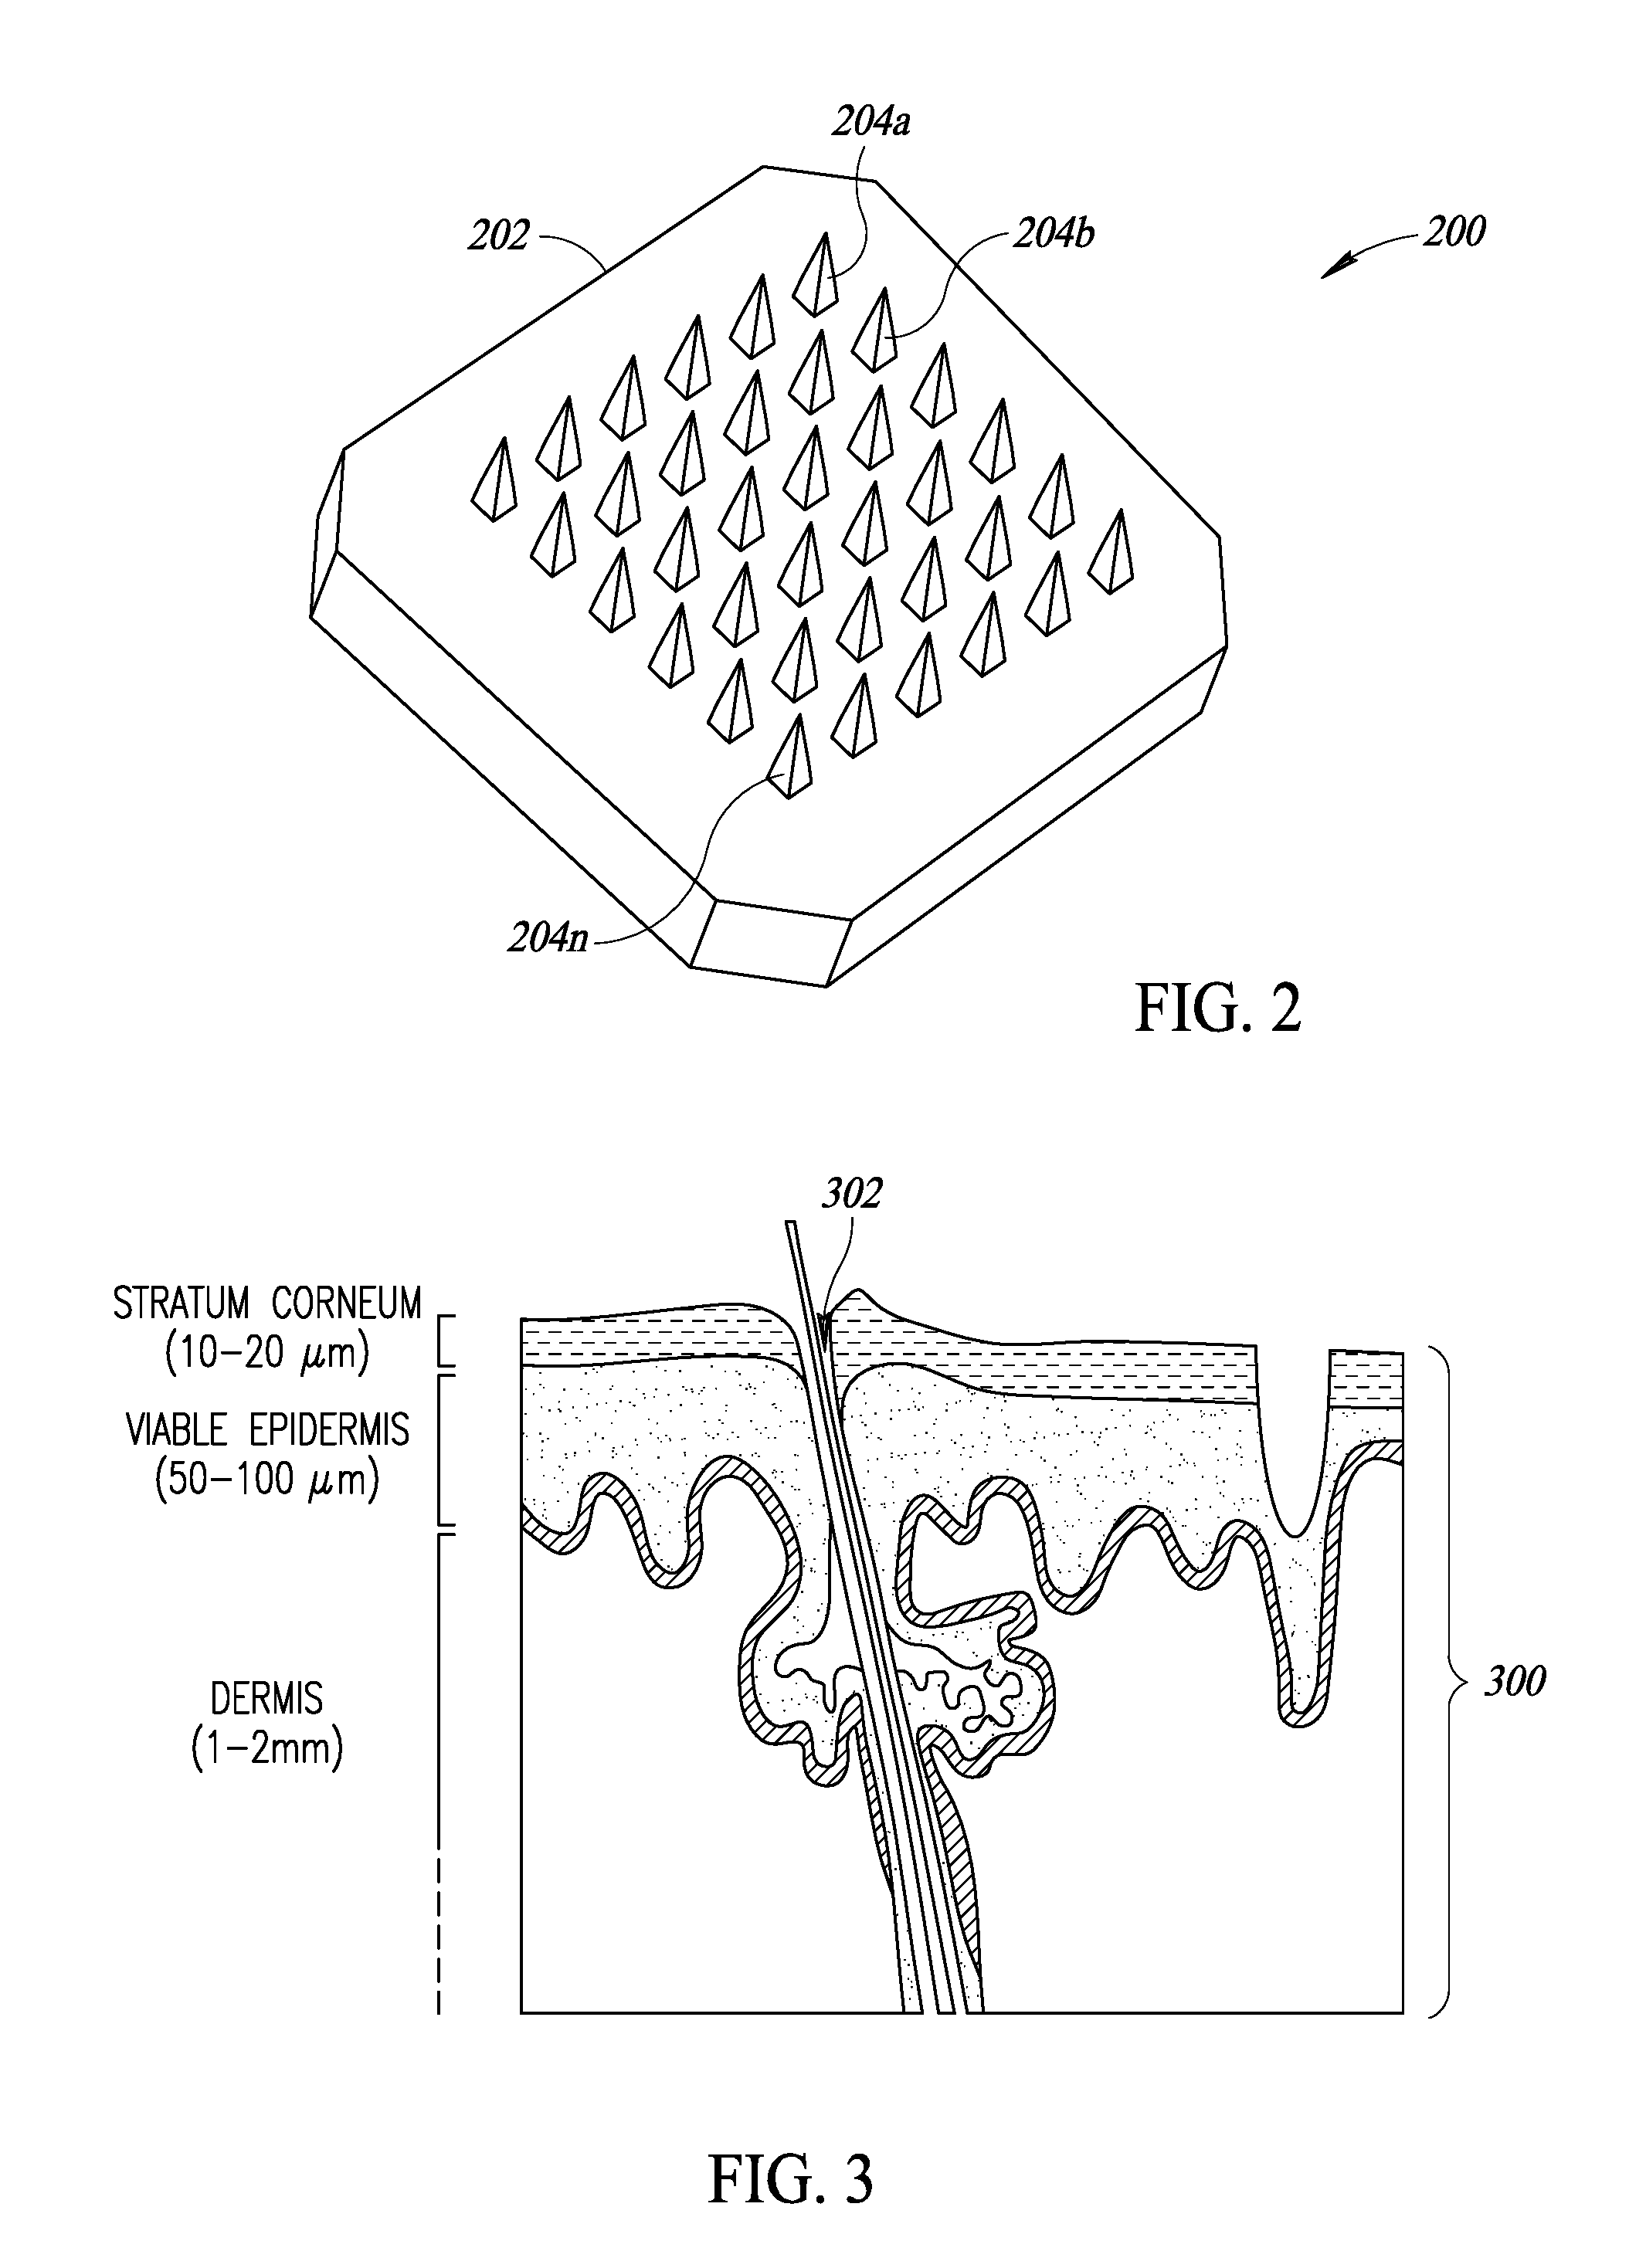 Device and method of skin care and treatment via microneedles having inherent anode and cathode properties, with or without cosmetic or pharmacological compositions